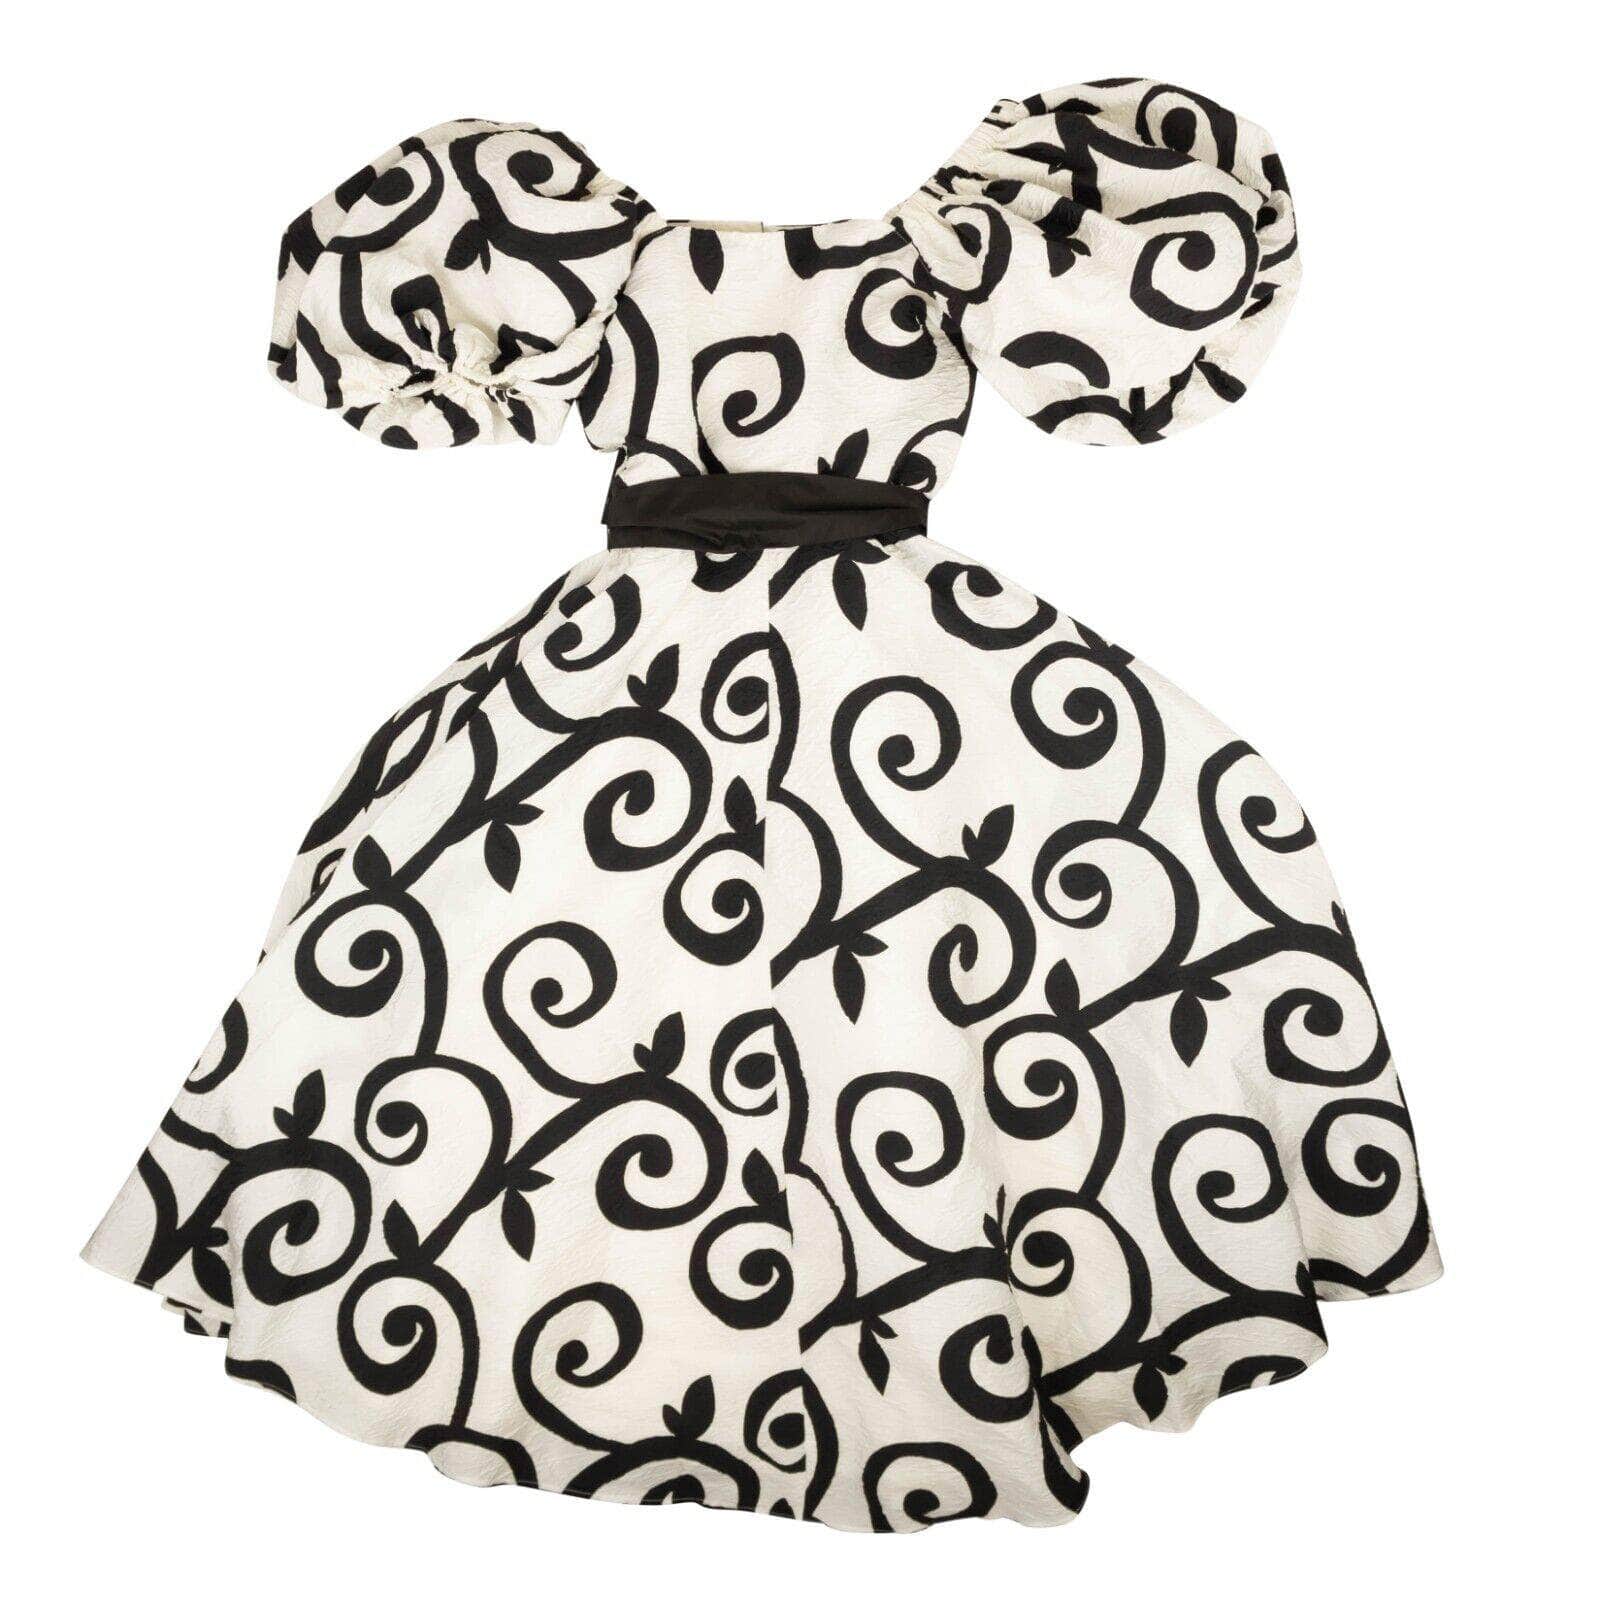 Rodarte 2000-5000, channelenable-all, chicmi, couponcollection, gender-womens, main-clothing, MixedApparel, rodarte, size-2, womens-formal-dresses 2 Black And White Cloque Swirl Dress 95-RDT-0013/2 95-RDT-0013/2